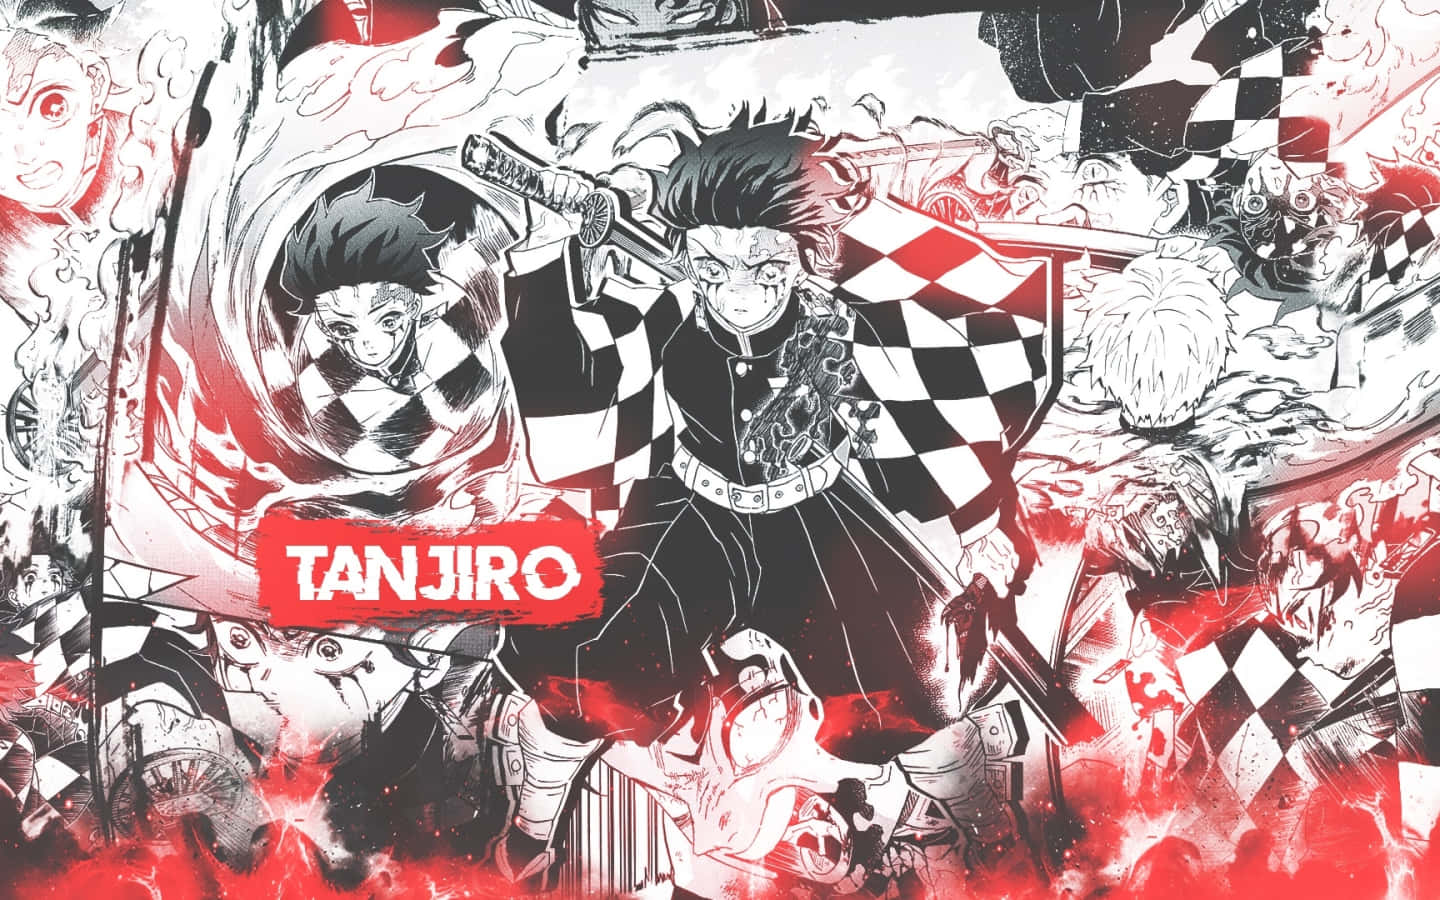 The brave Tanjiro goes beyond the limits to protect his family and friends.